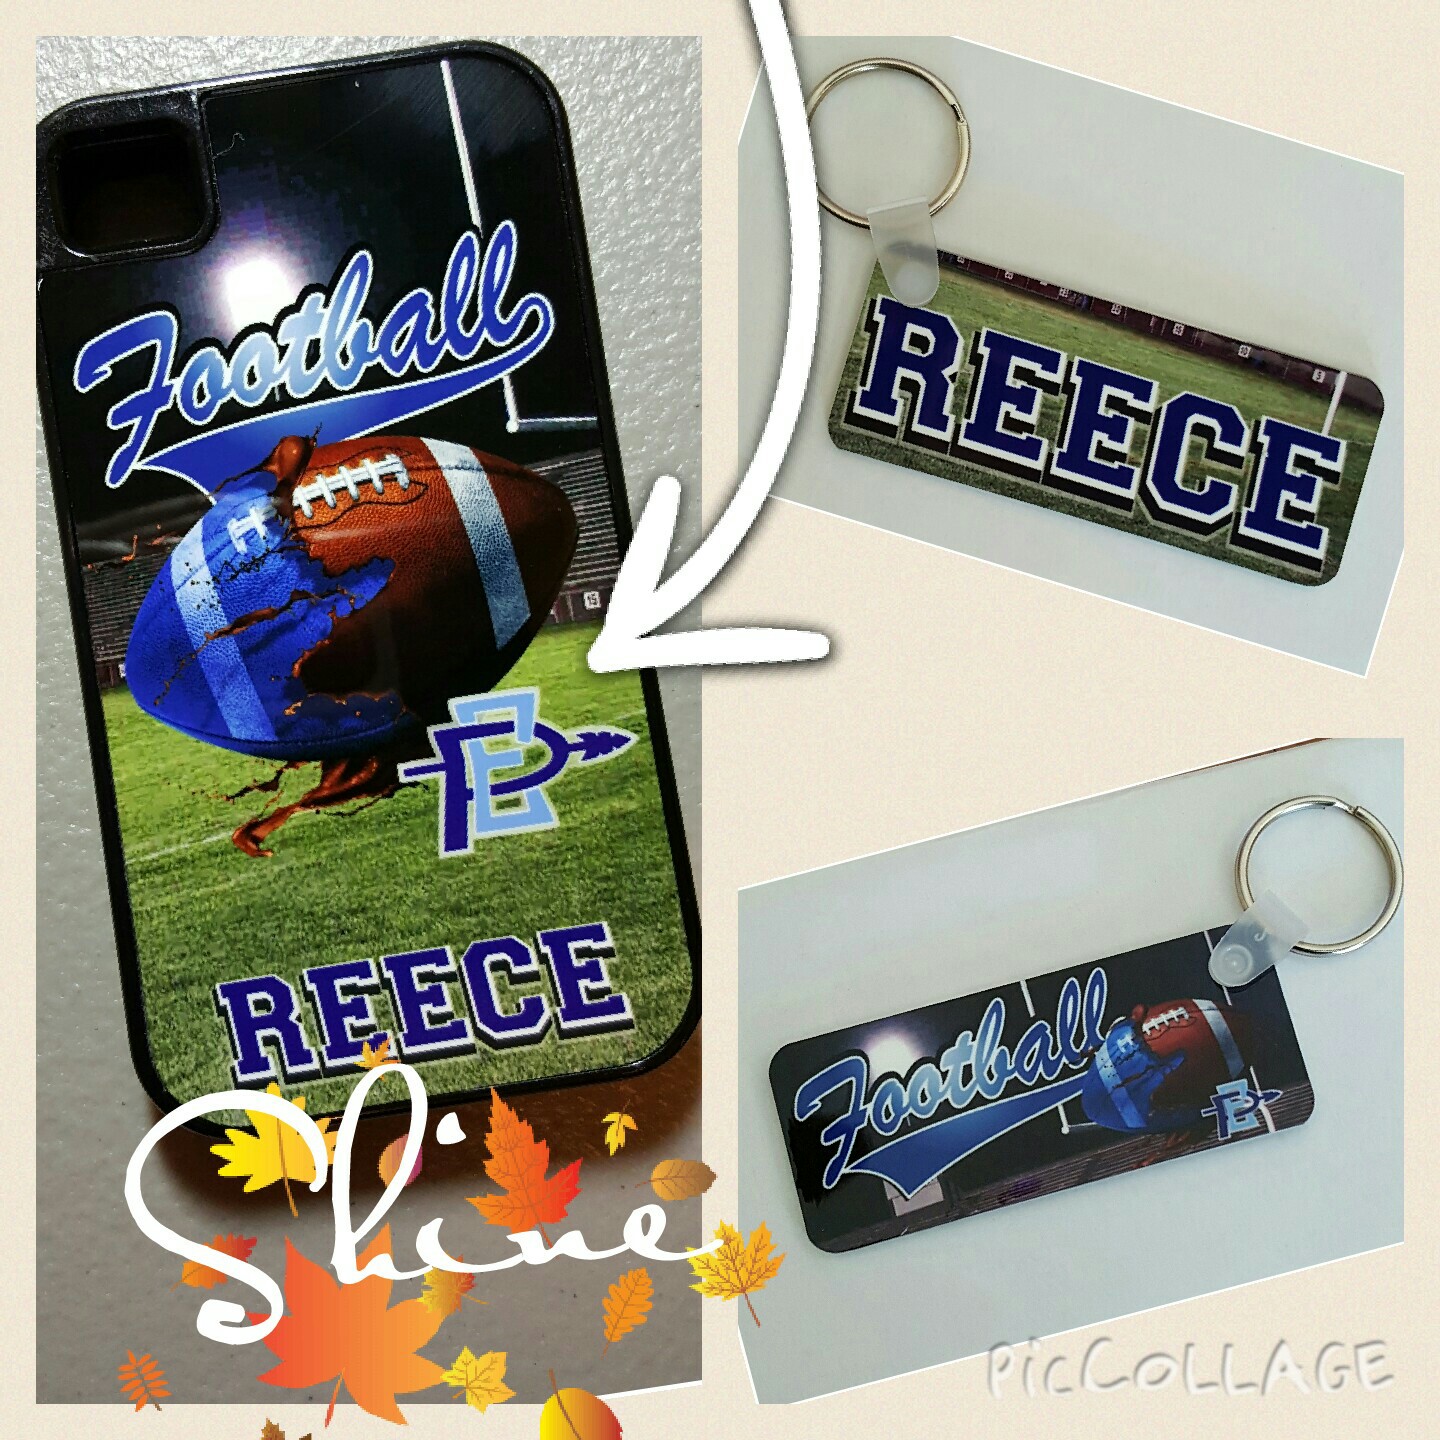 Brookley Cell Cover w/Keychain made with sublimation printing